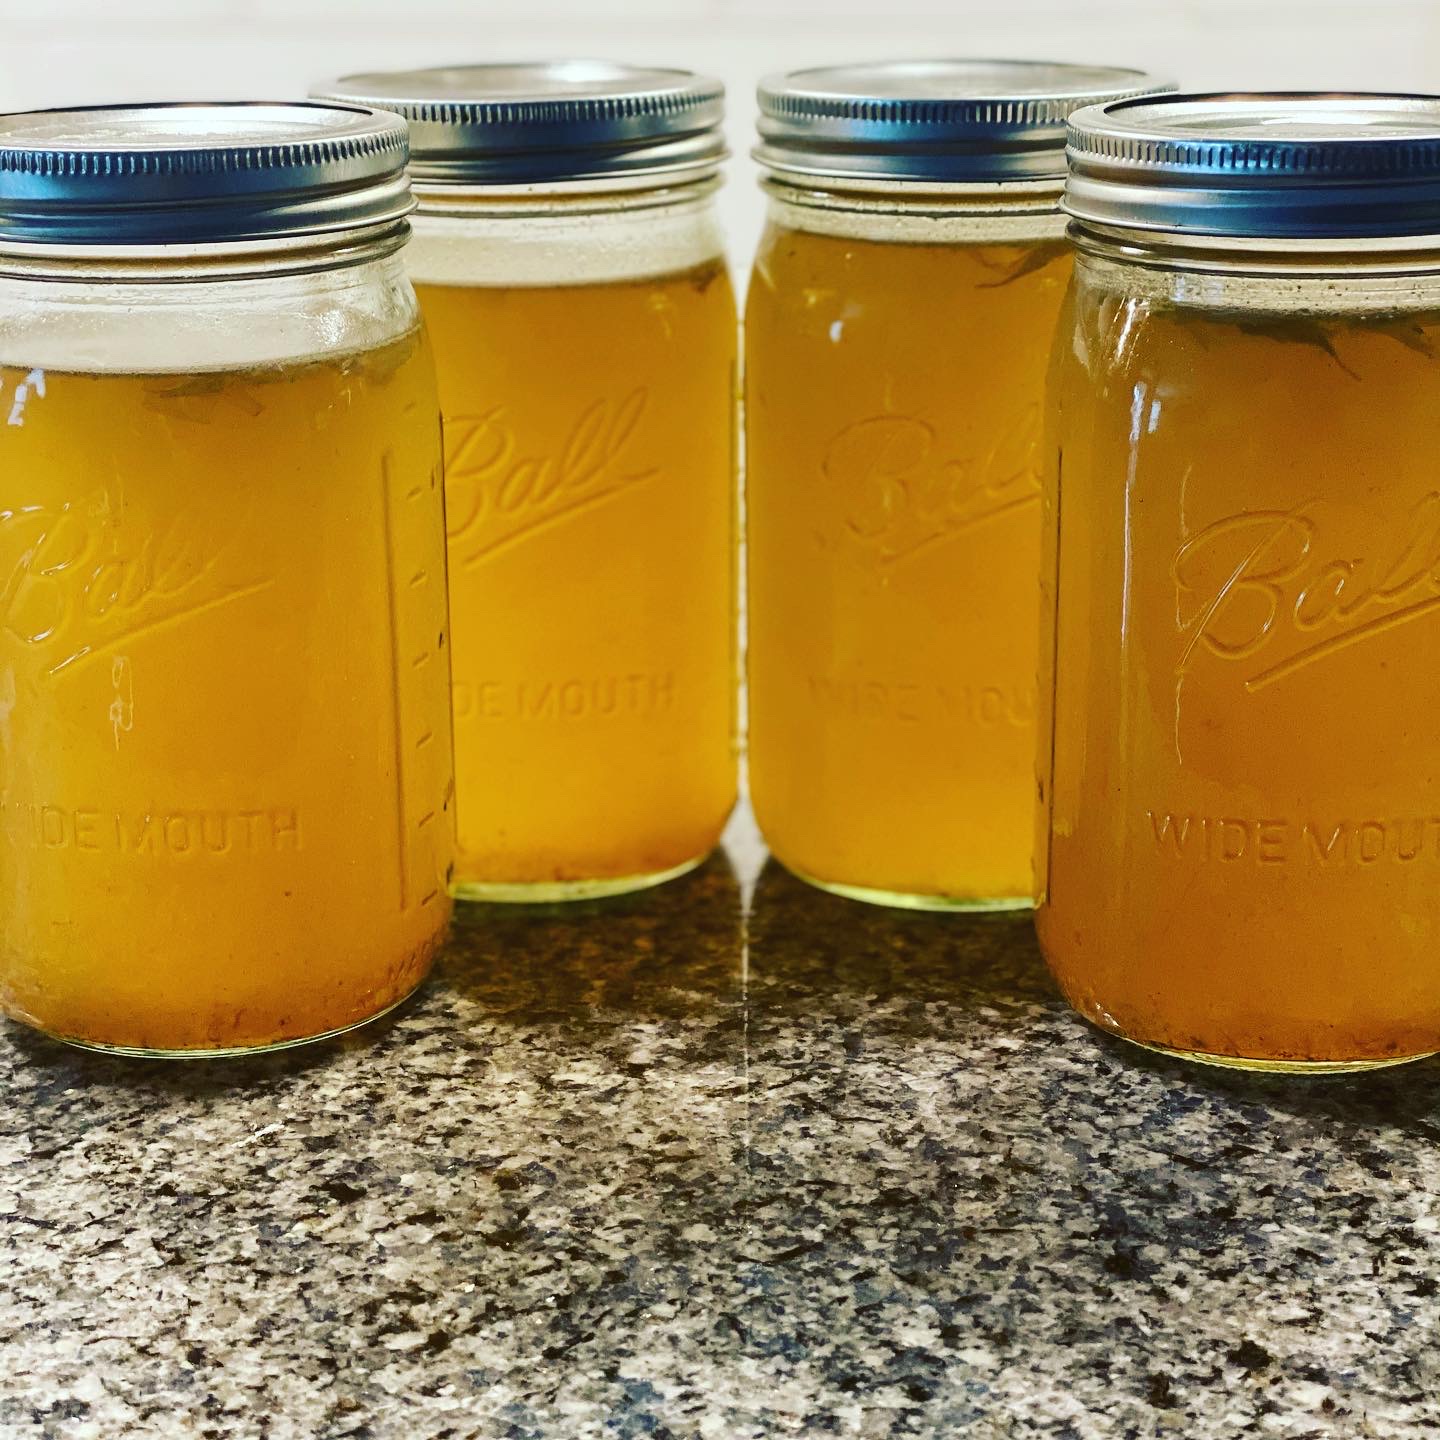 Homemade Vegetable Stock in Ball Wide-Mouth Jars (4 total)